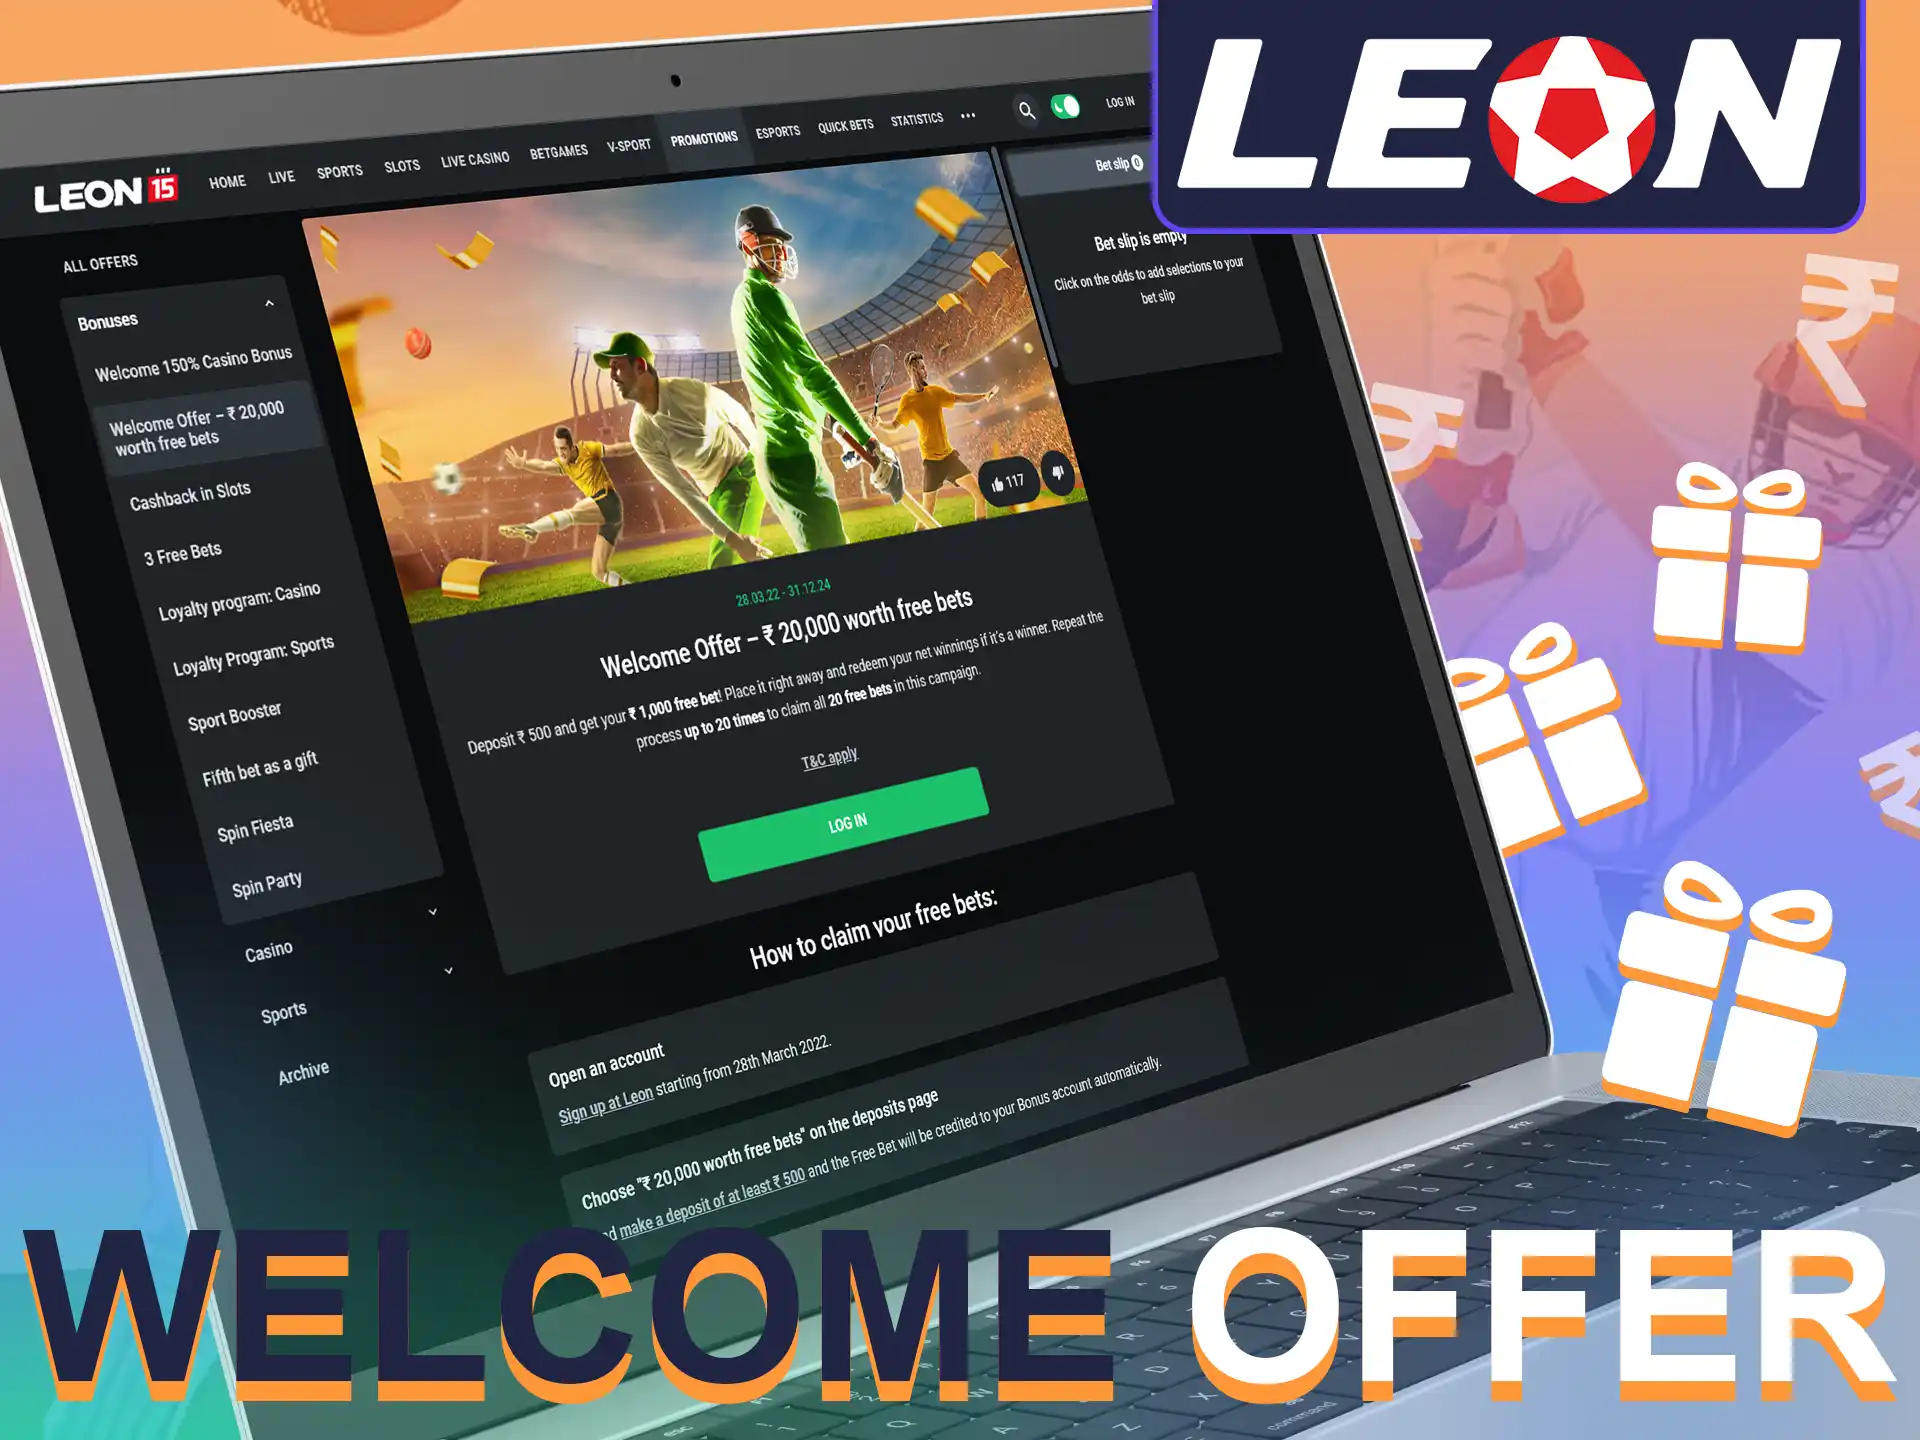 Leon Bet offers you a welcome offer of 20 free bets for new players.